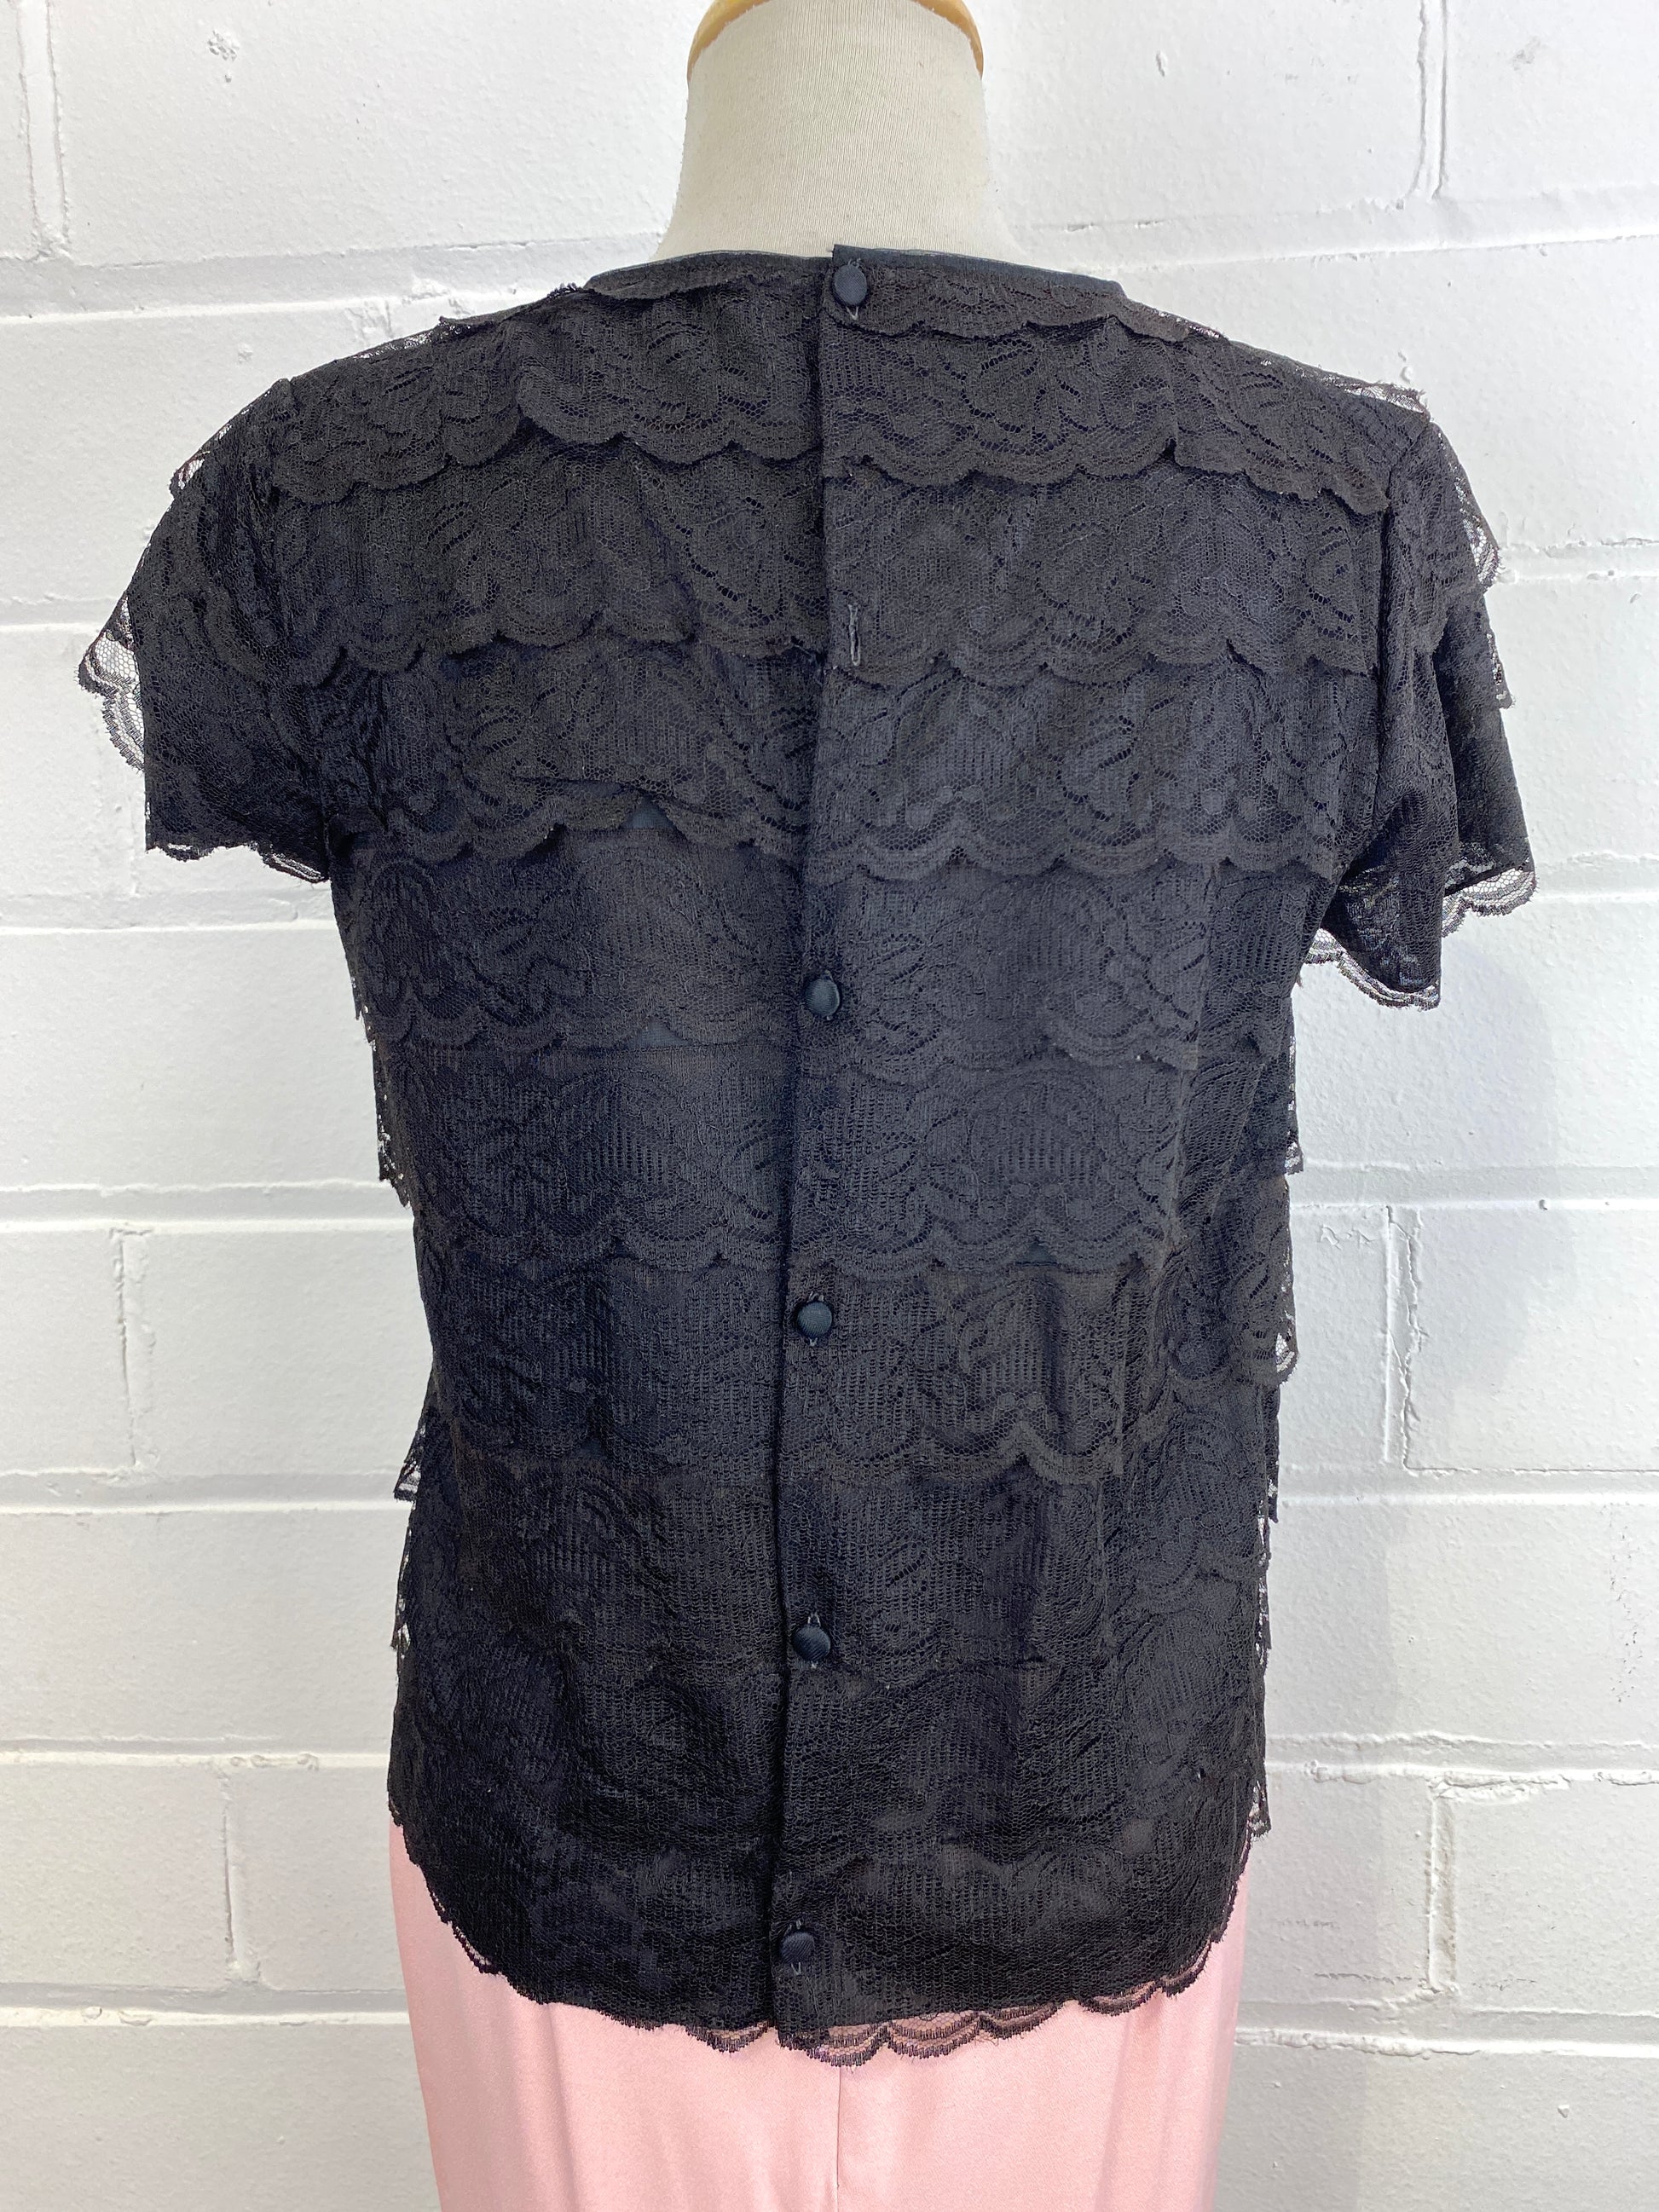 Vintage 1960s Black Lace Short Sleeve Top, Small